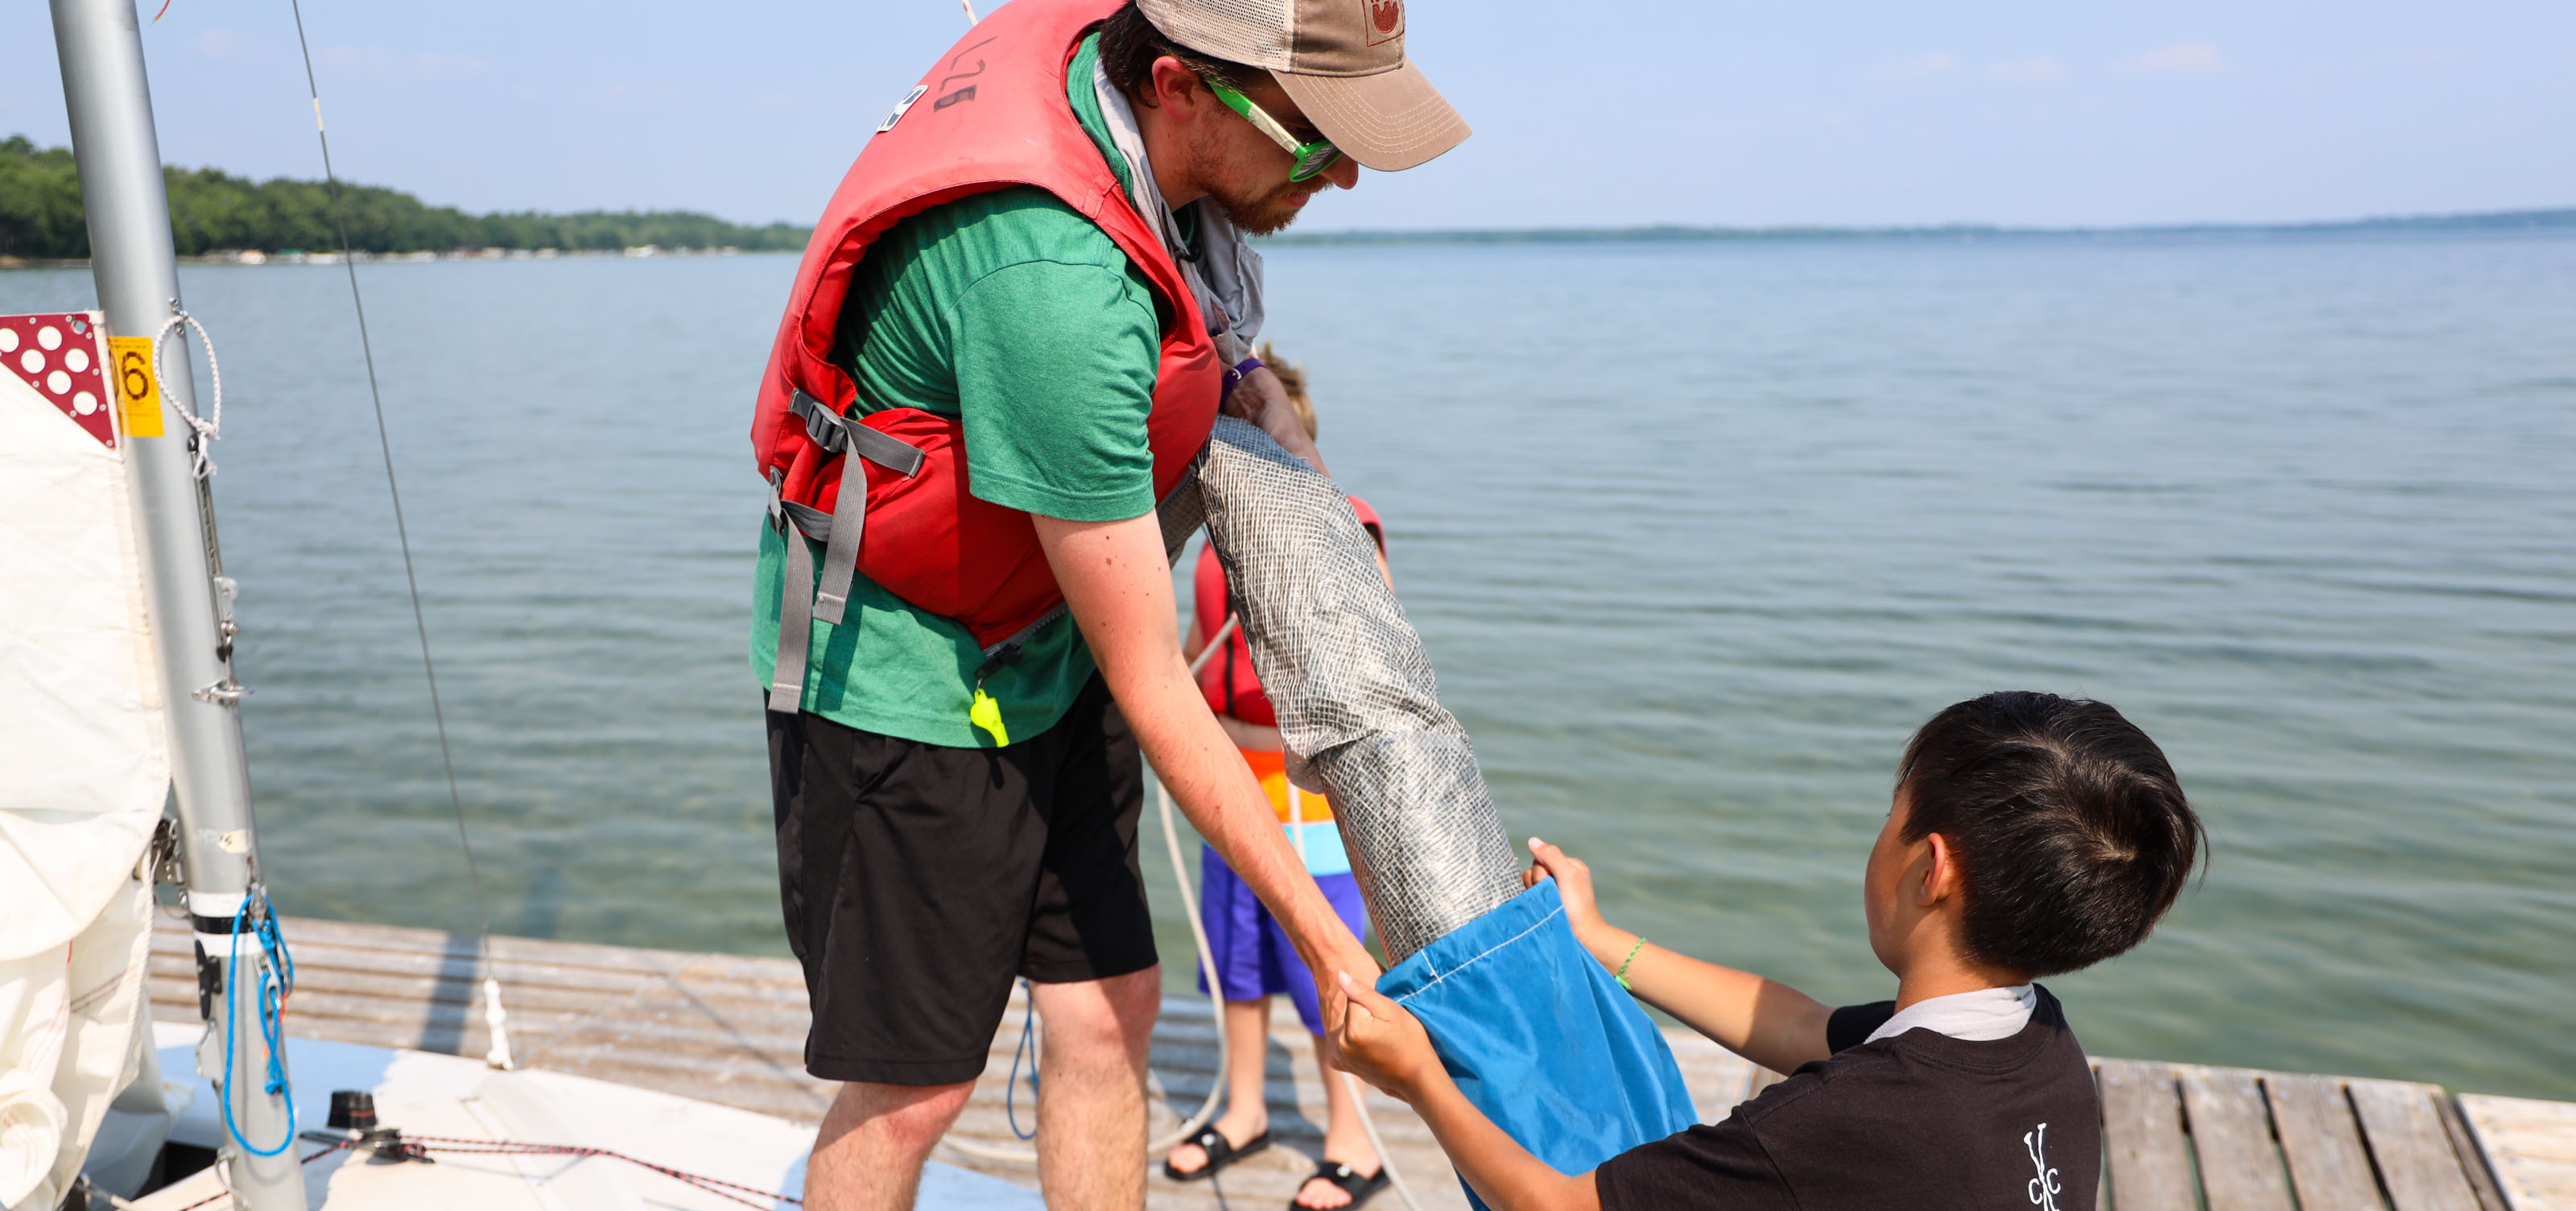 camp staff member putting away sail on boat with young boy.